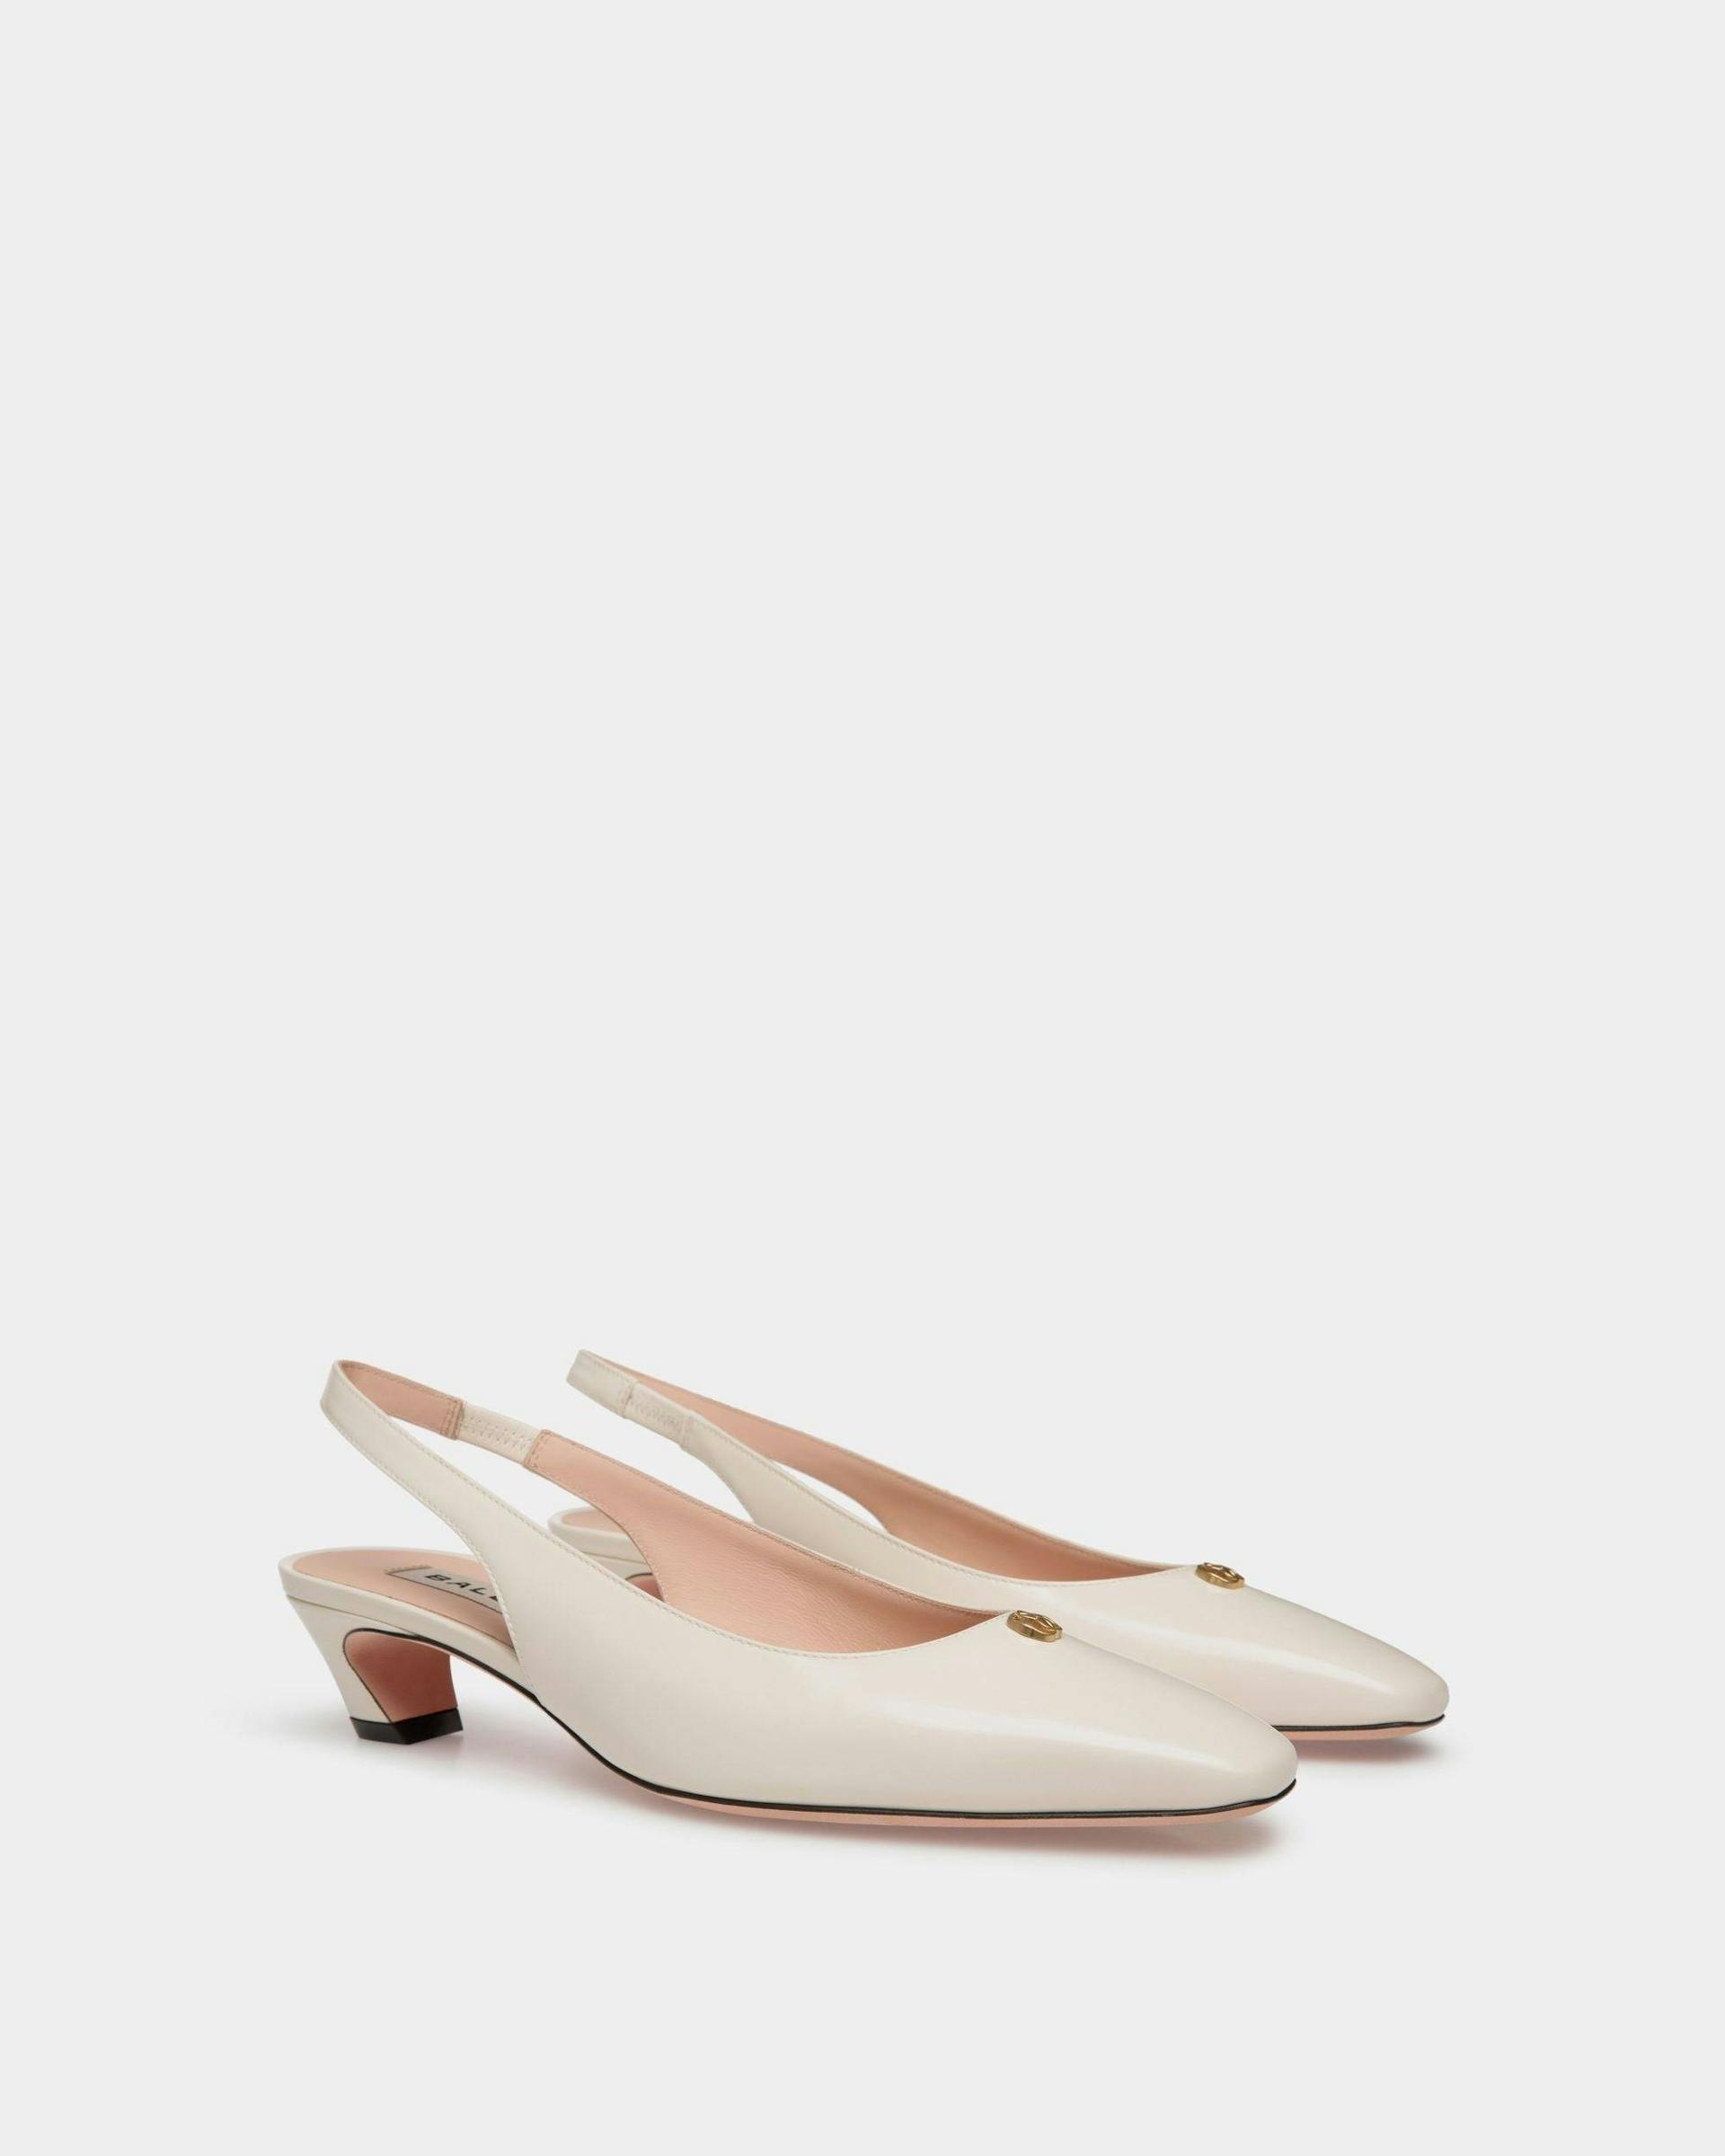 Women's Sylt Slingback Pump In White Leather | Bally | Still Life 3/4 Front